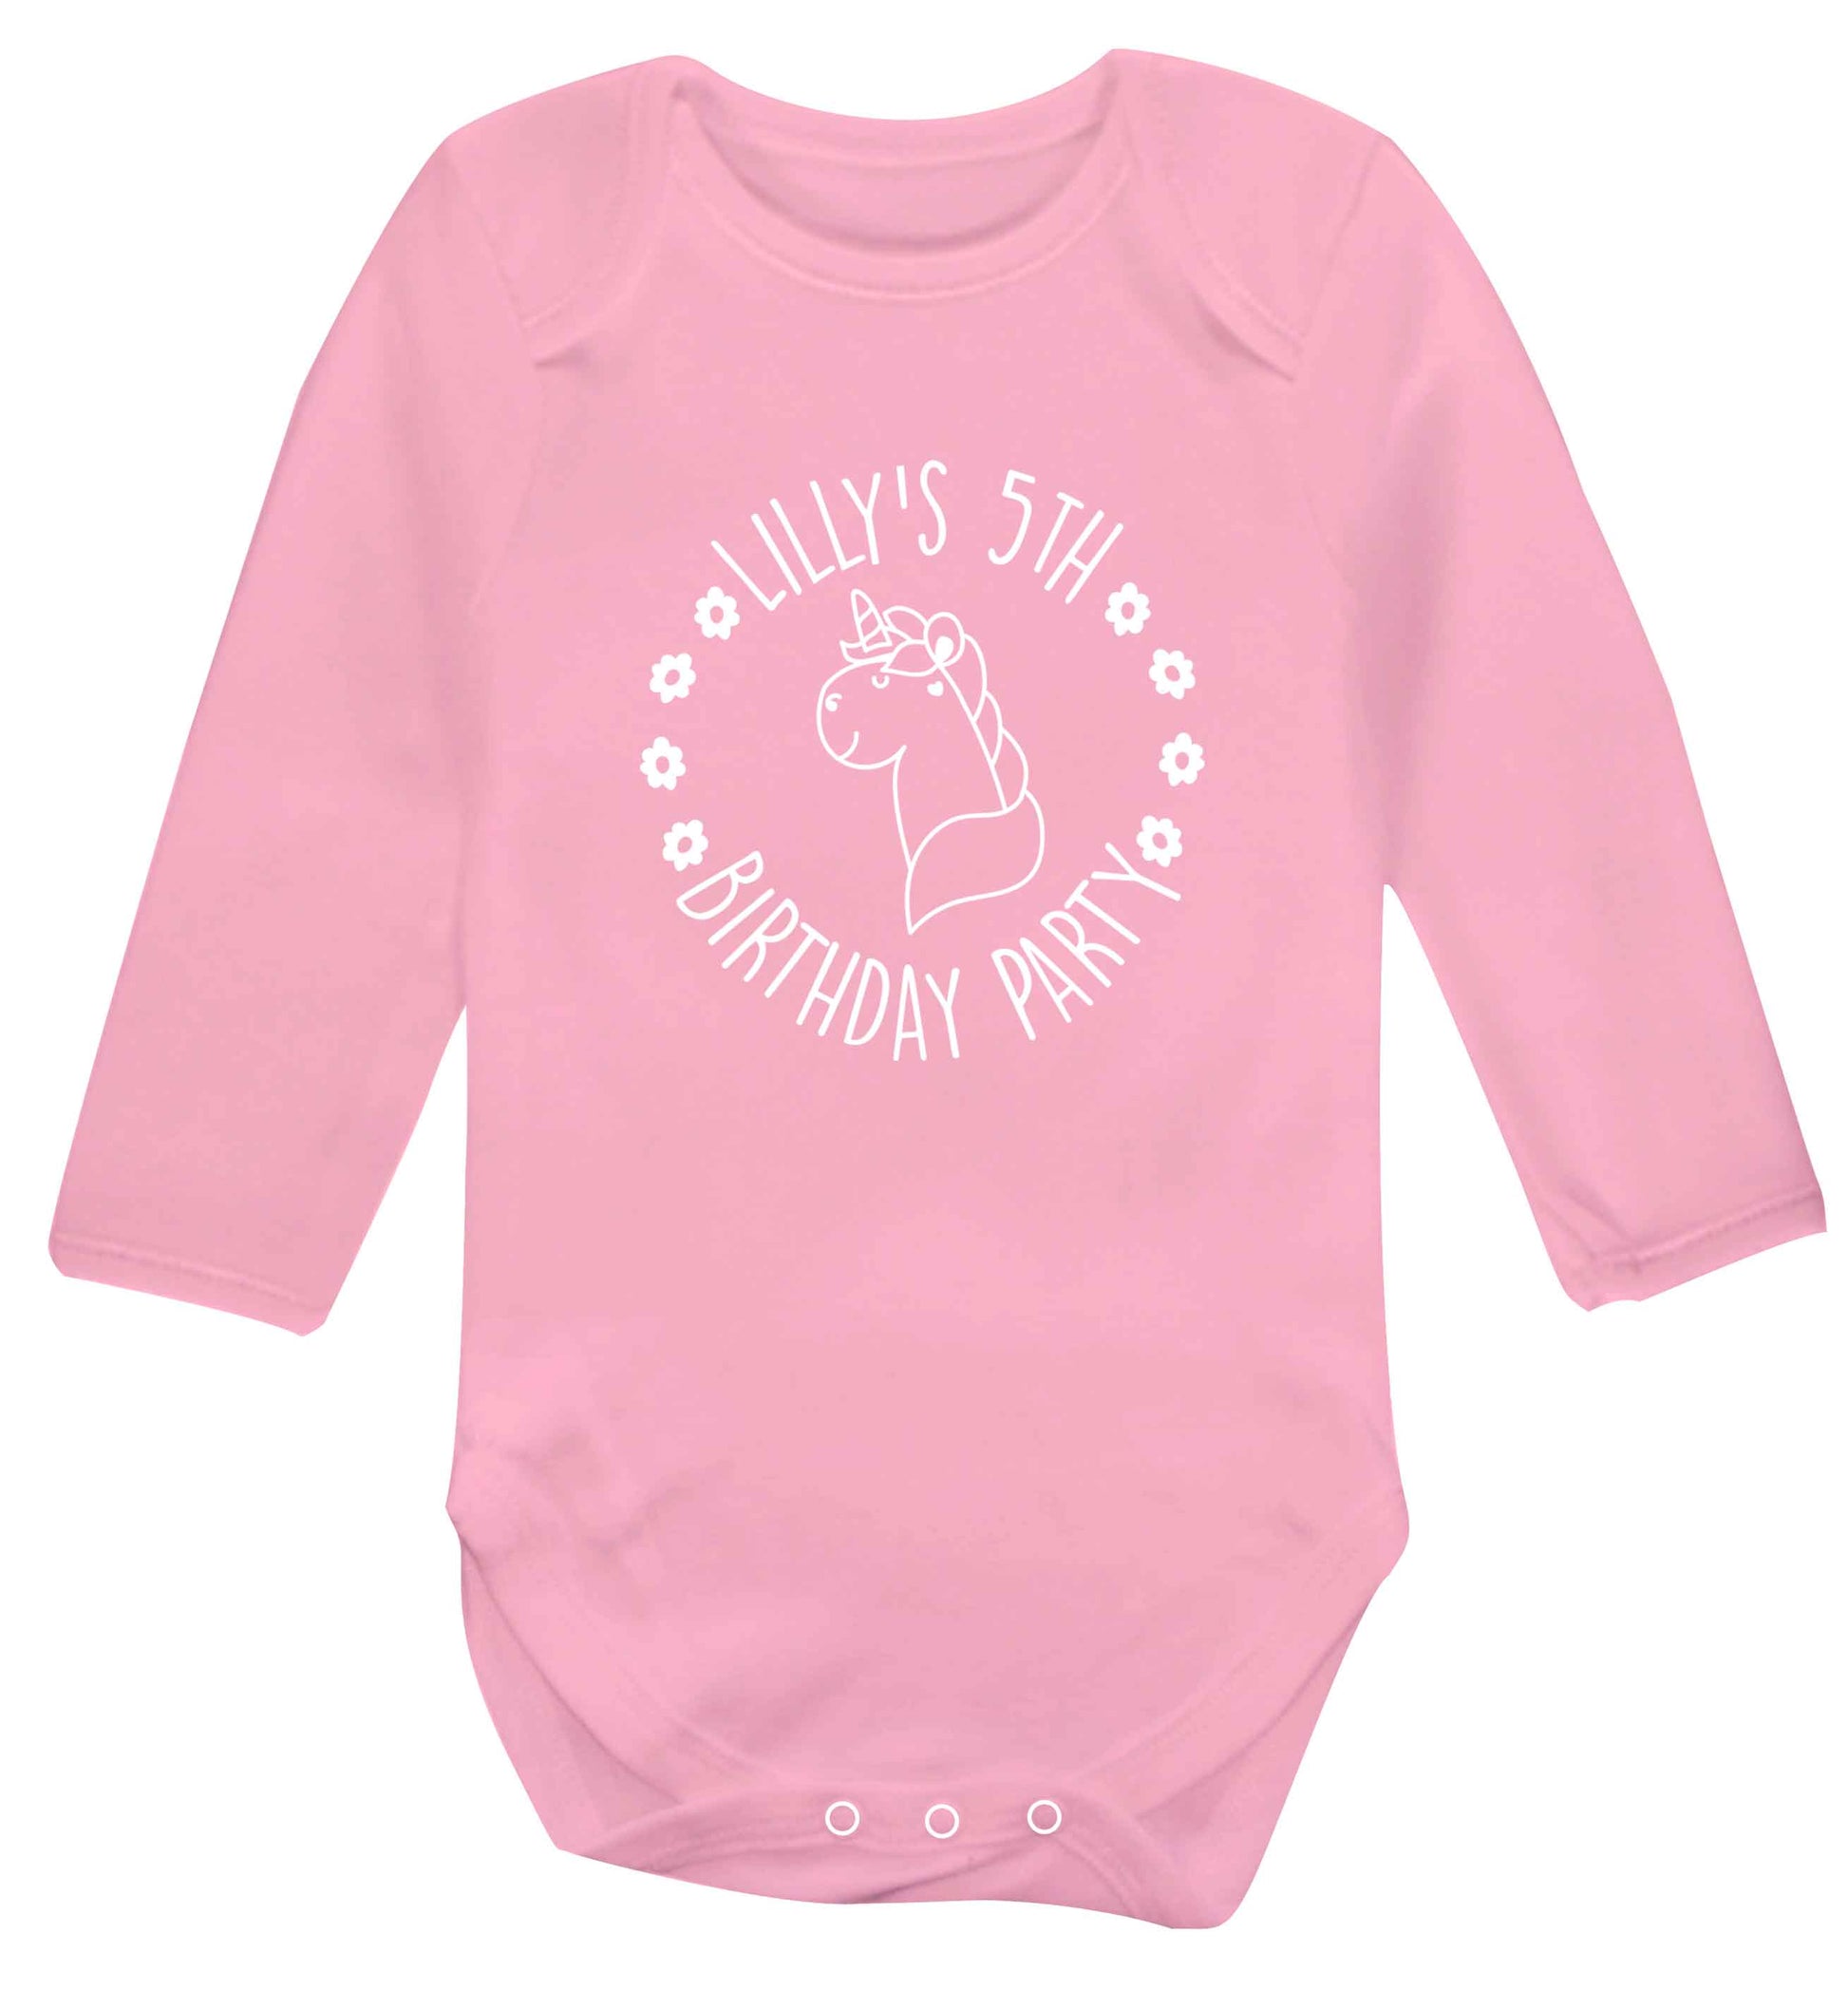 Personalised unicorn birthday party baby vest long sleeved pale pink 6-12 months